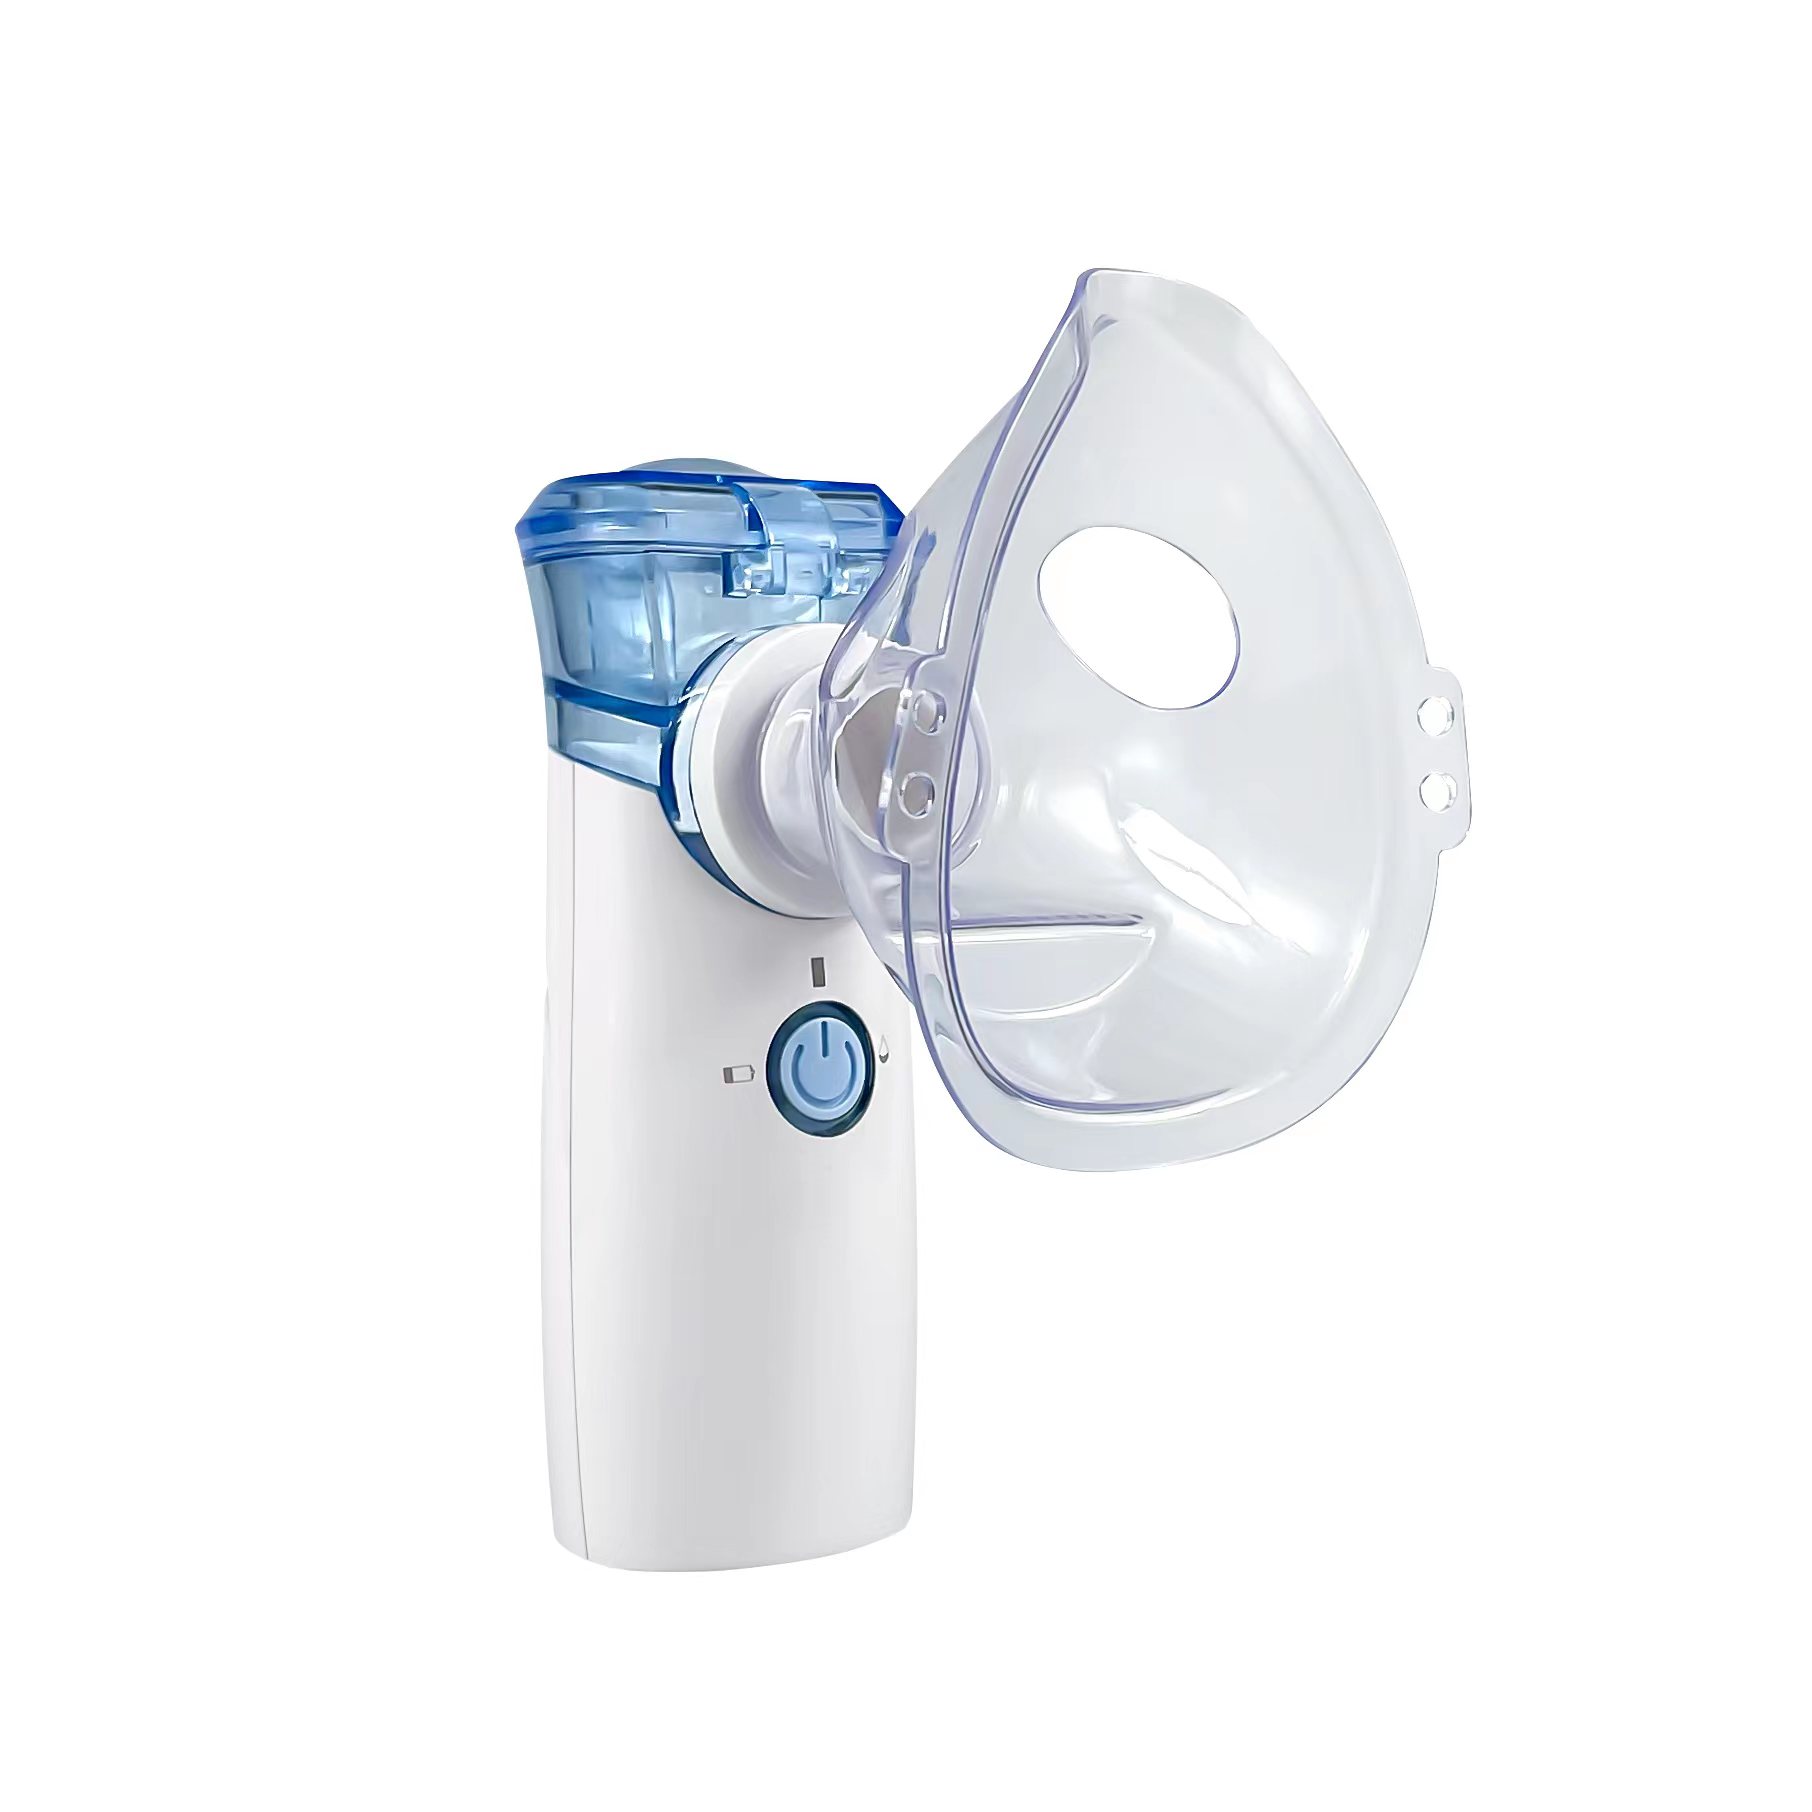 Portable Nebulizer Nebulizer Machine for Adults and Kids Travel and Household Use Handheld Mesh Nebulizer for Breathing Problems